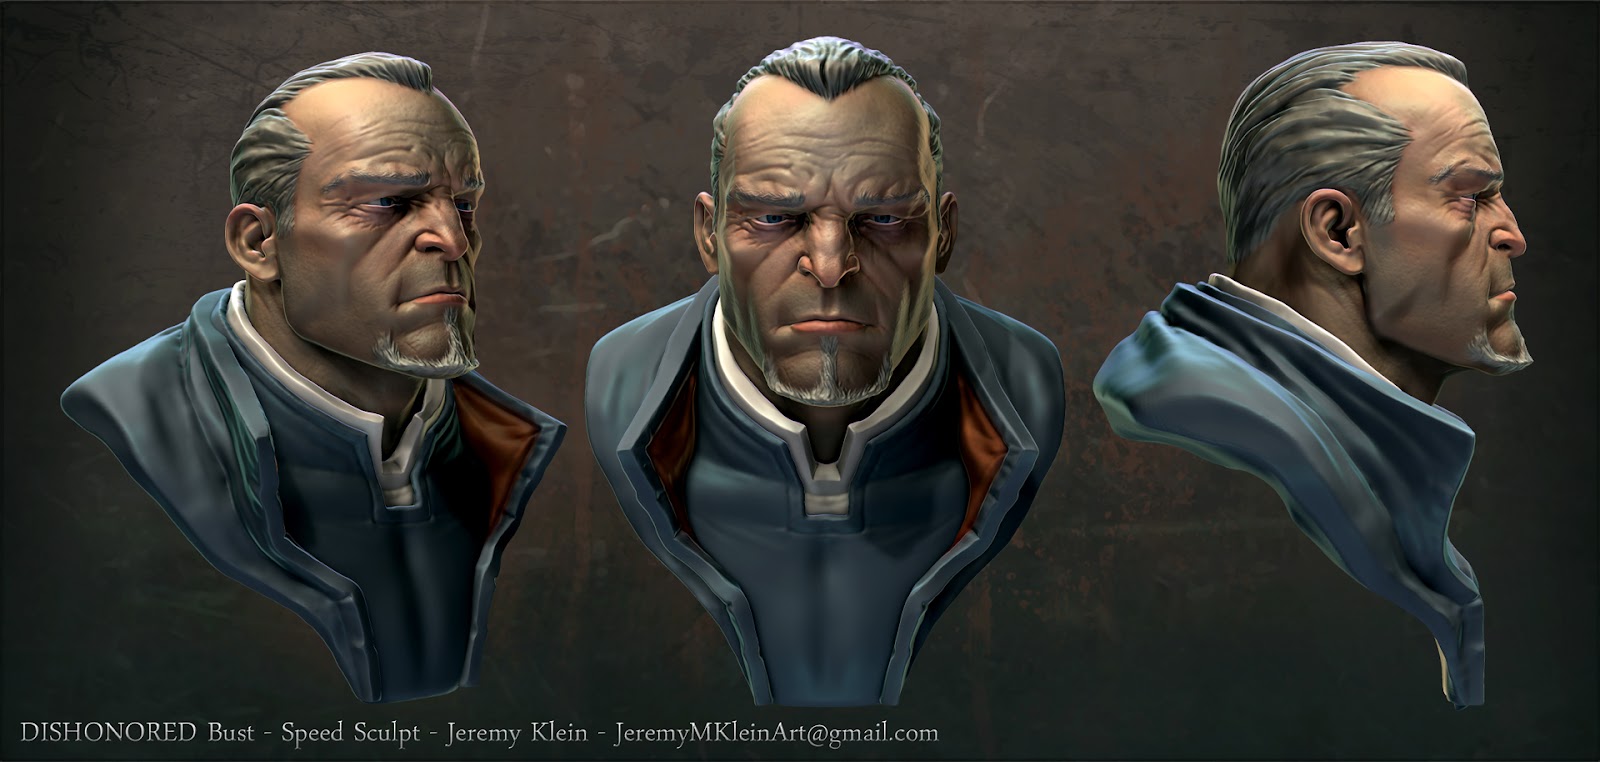 Dishonored_Bust_Color_01.jpg